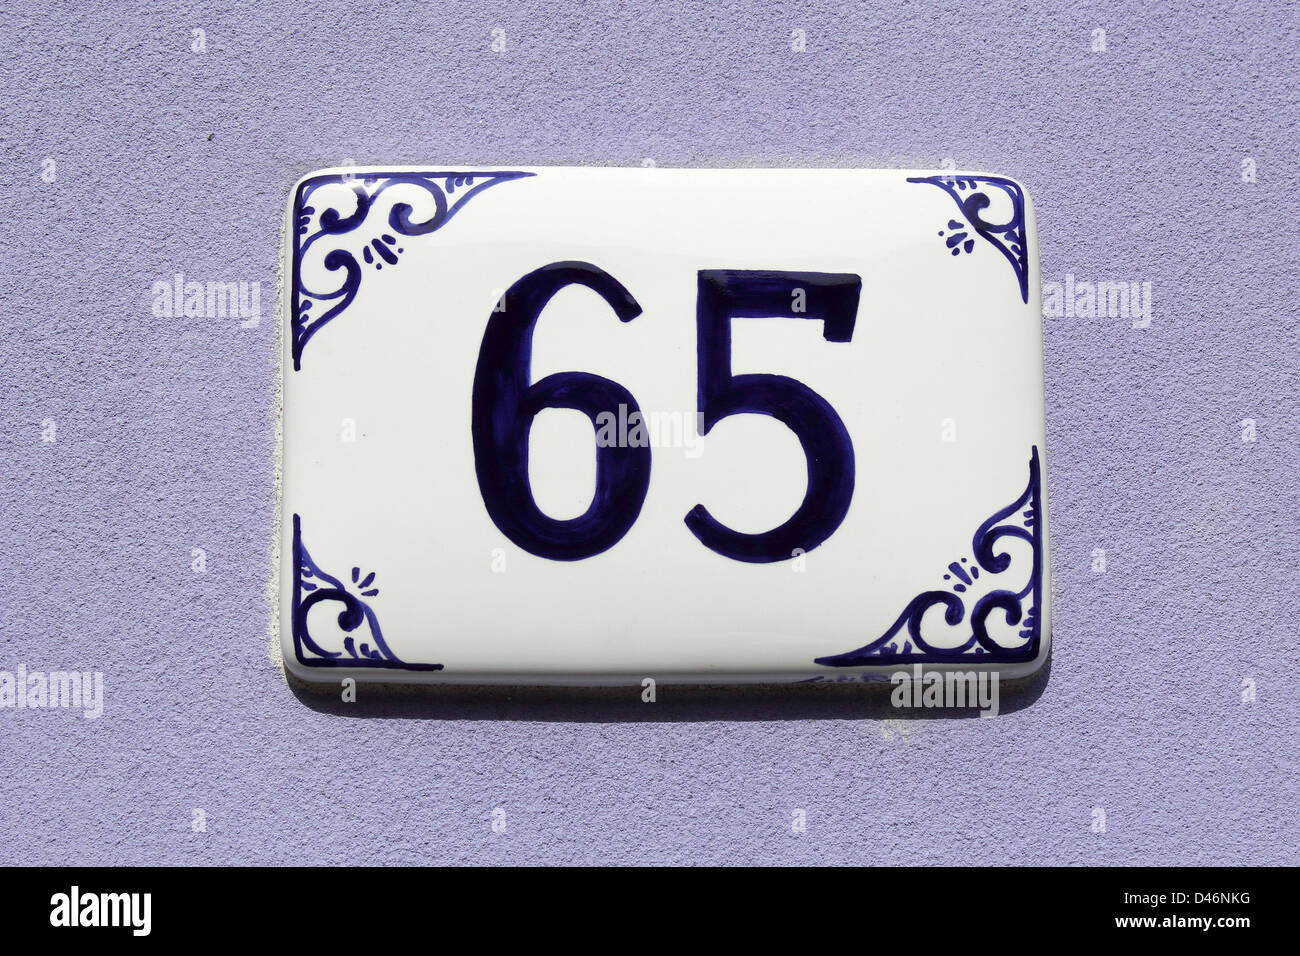 number sixty-five, house address plate number Stock Photo